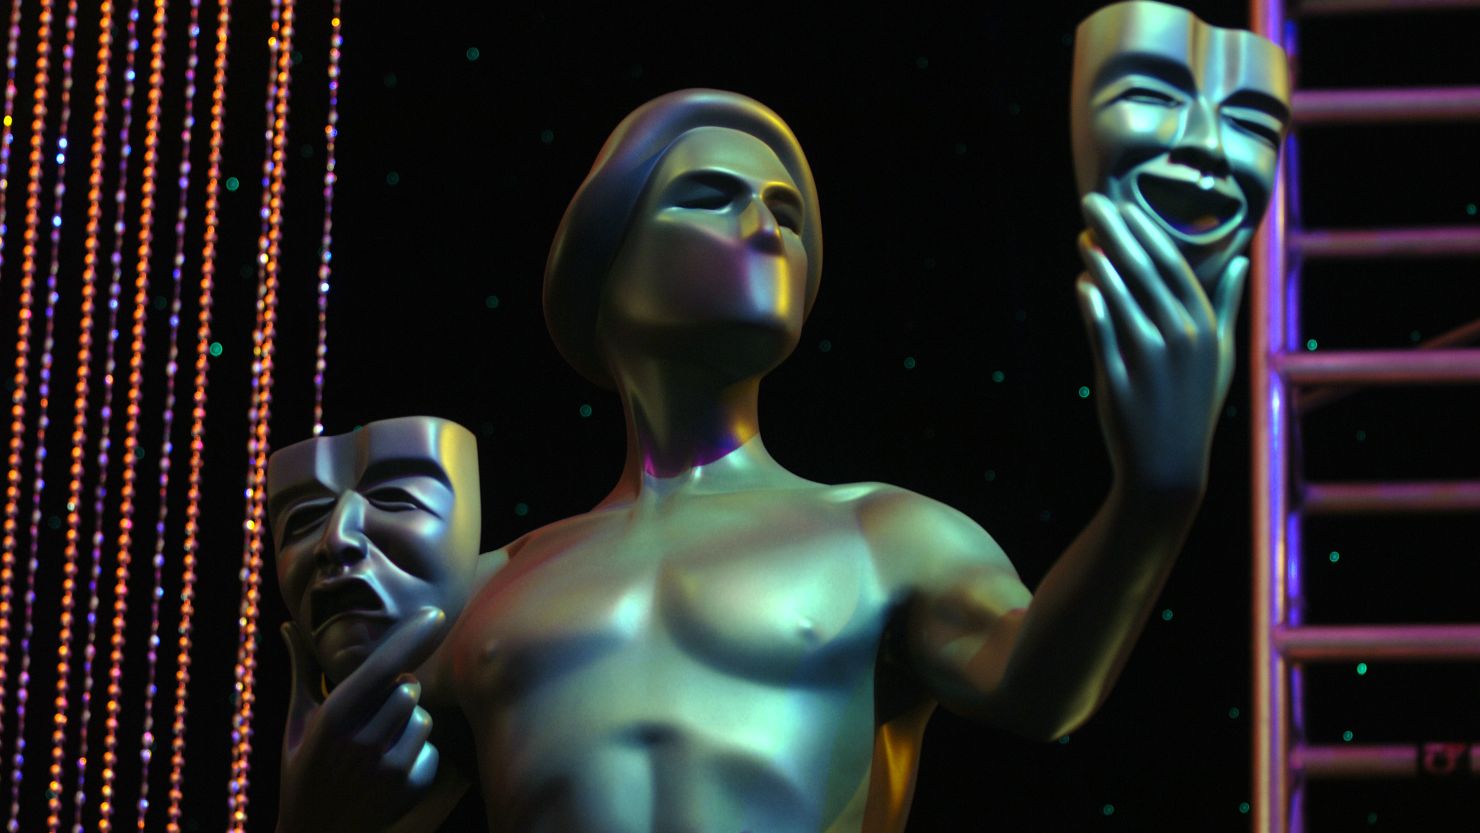 The Screen Actors Guild Awards will air on Sunday, January 27 at 8 p.m. ET and 5 p.m. PT.